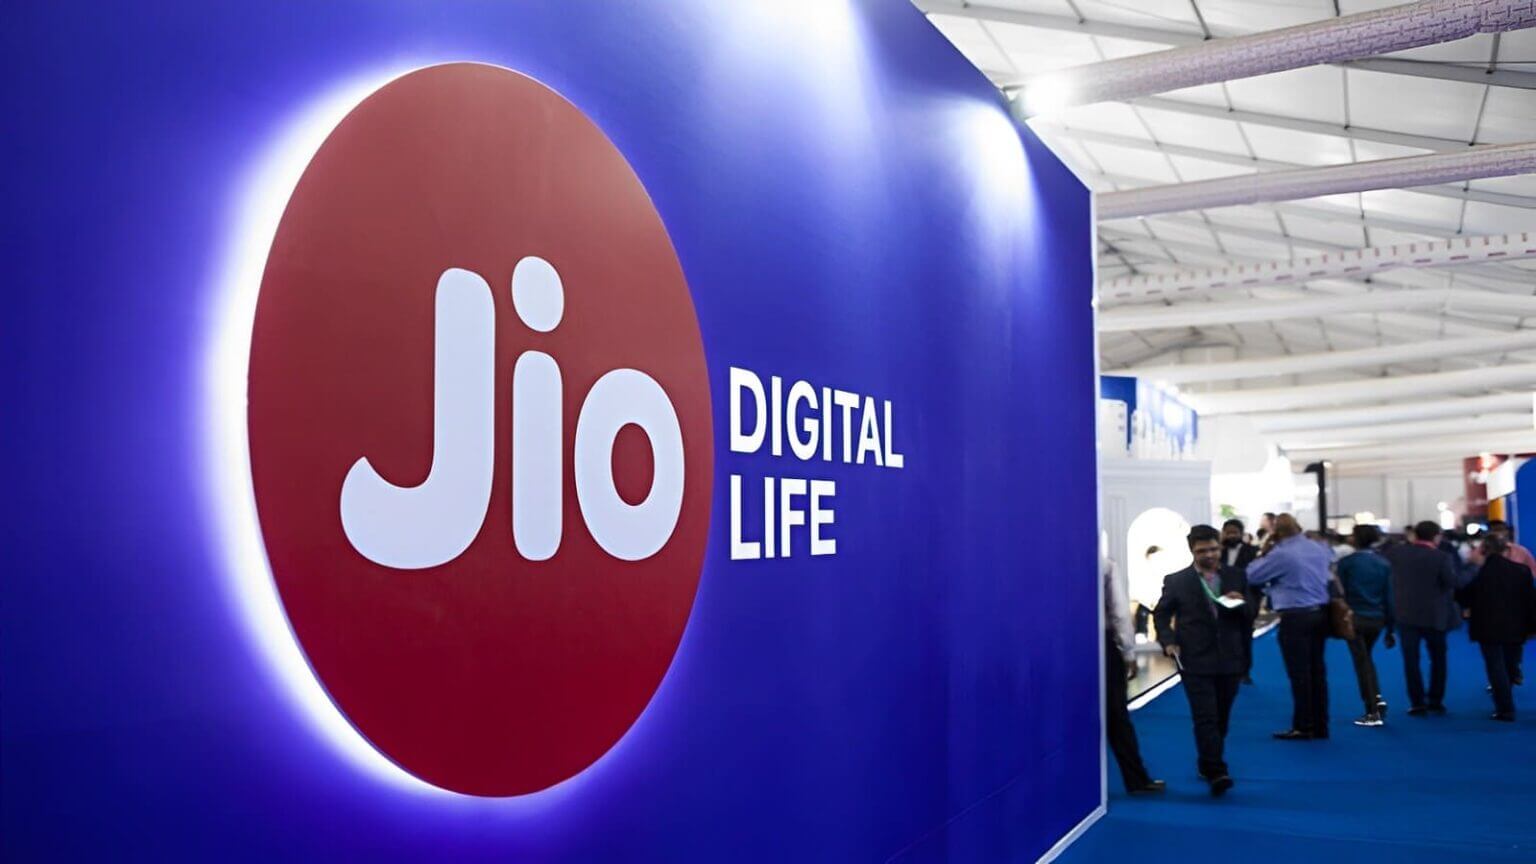 FTSE Takes Back Its Decision Of Removing Jio Financial From The Global Indices